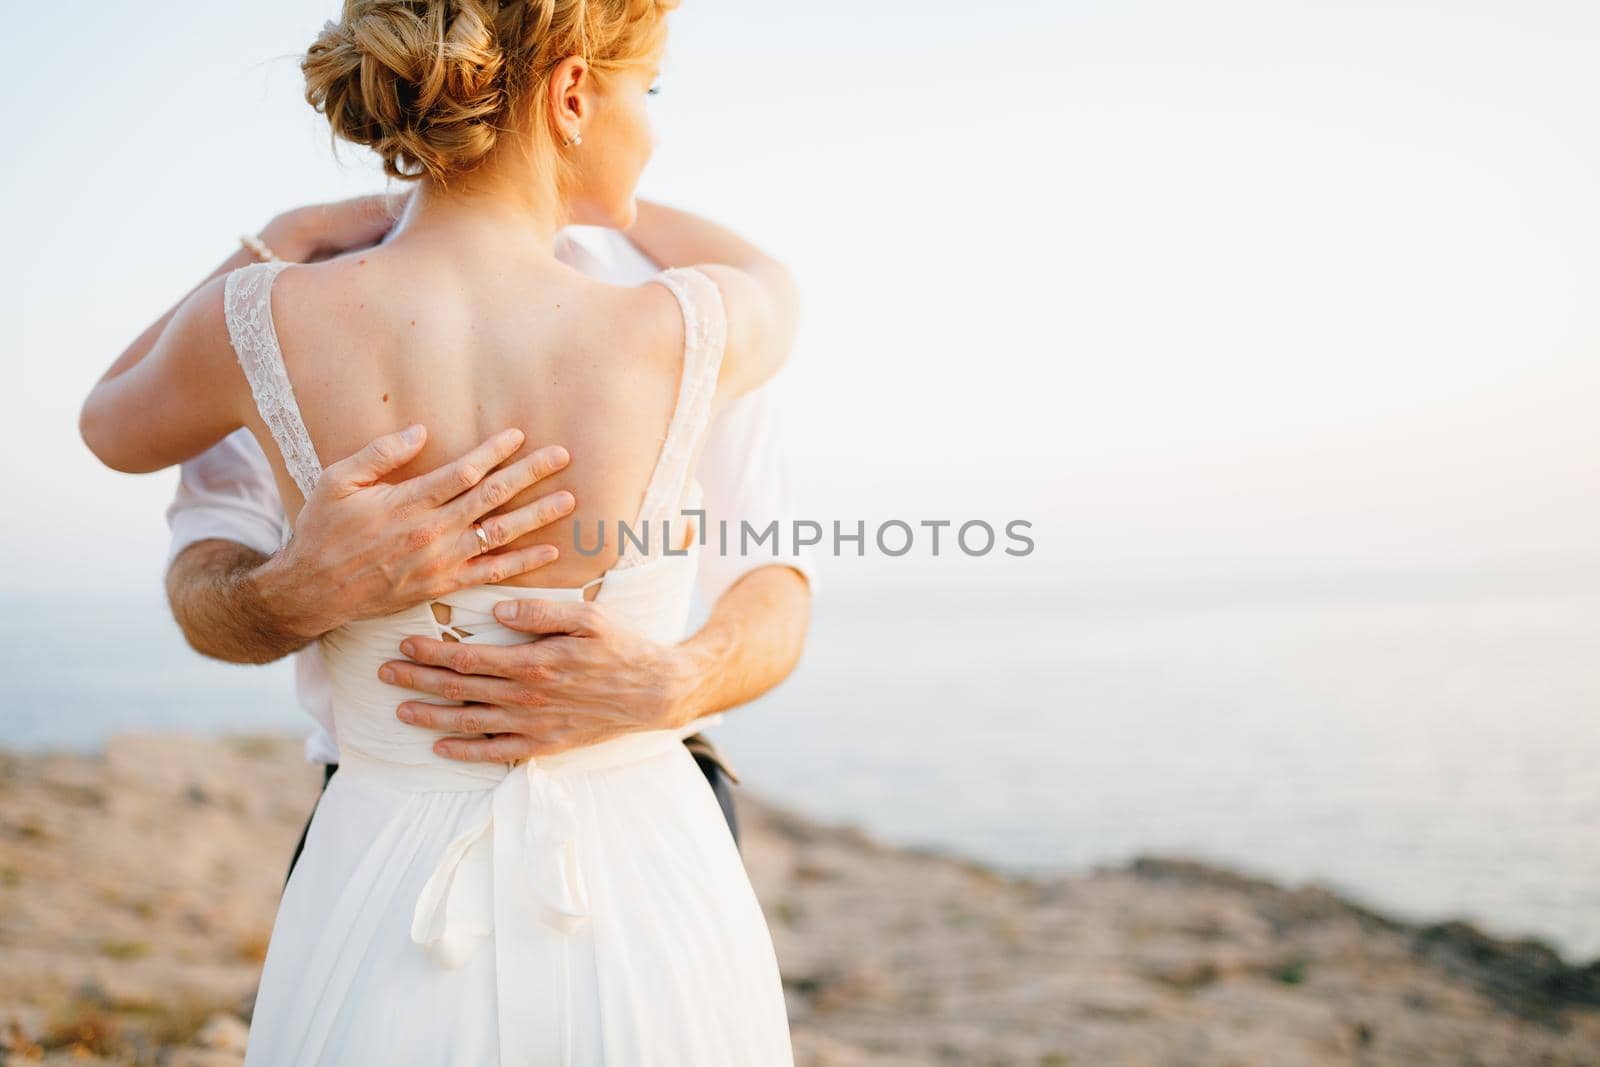 The bride and groom hug on the rocks by the sea against the backdrop of the mountains and the island of Mamula, back view. High quality photo